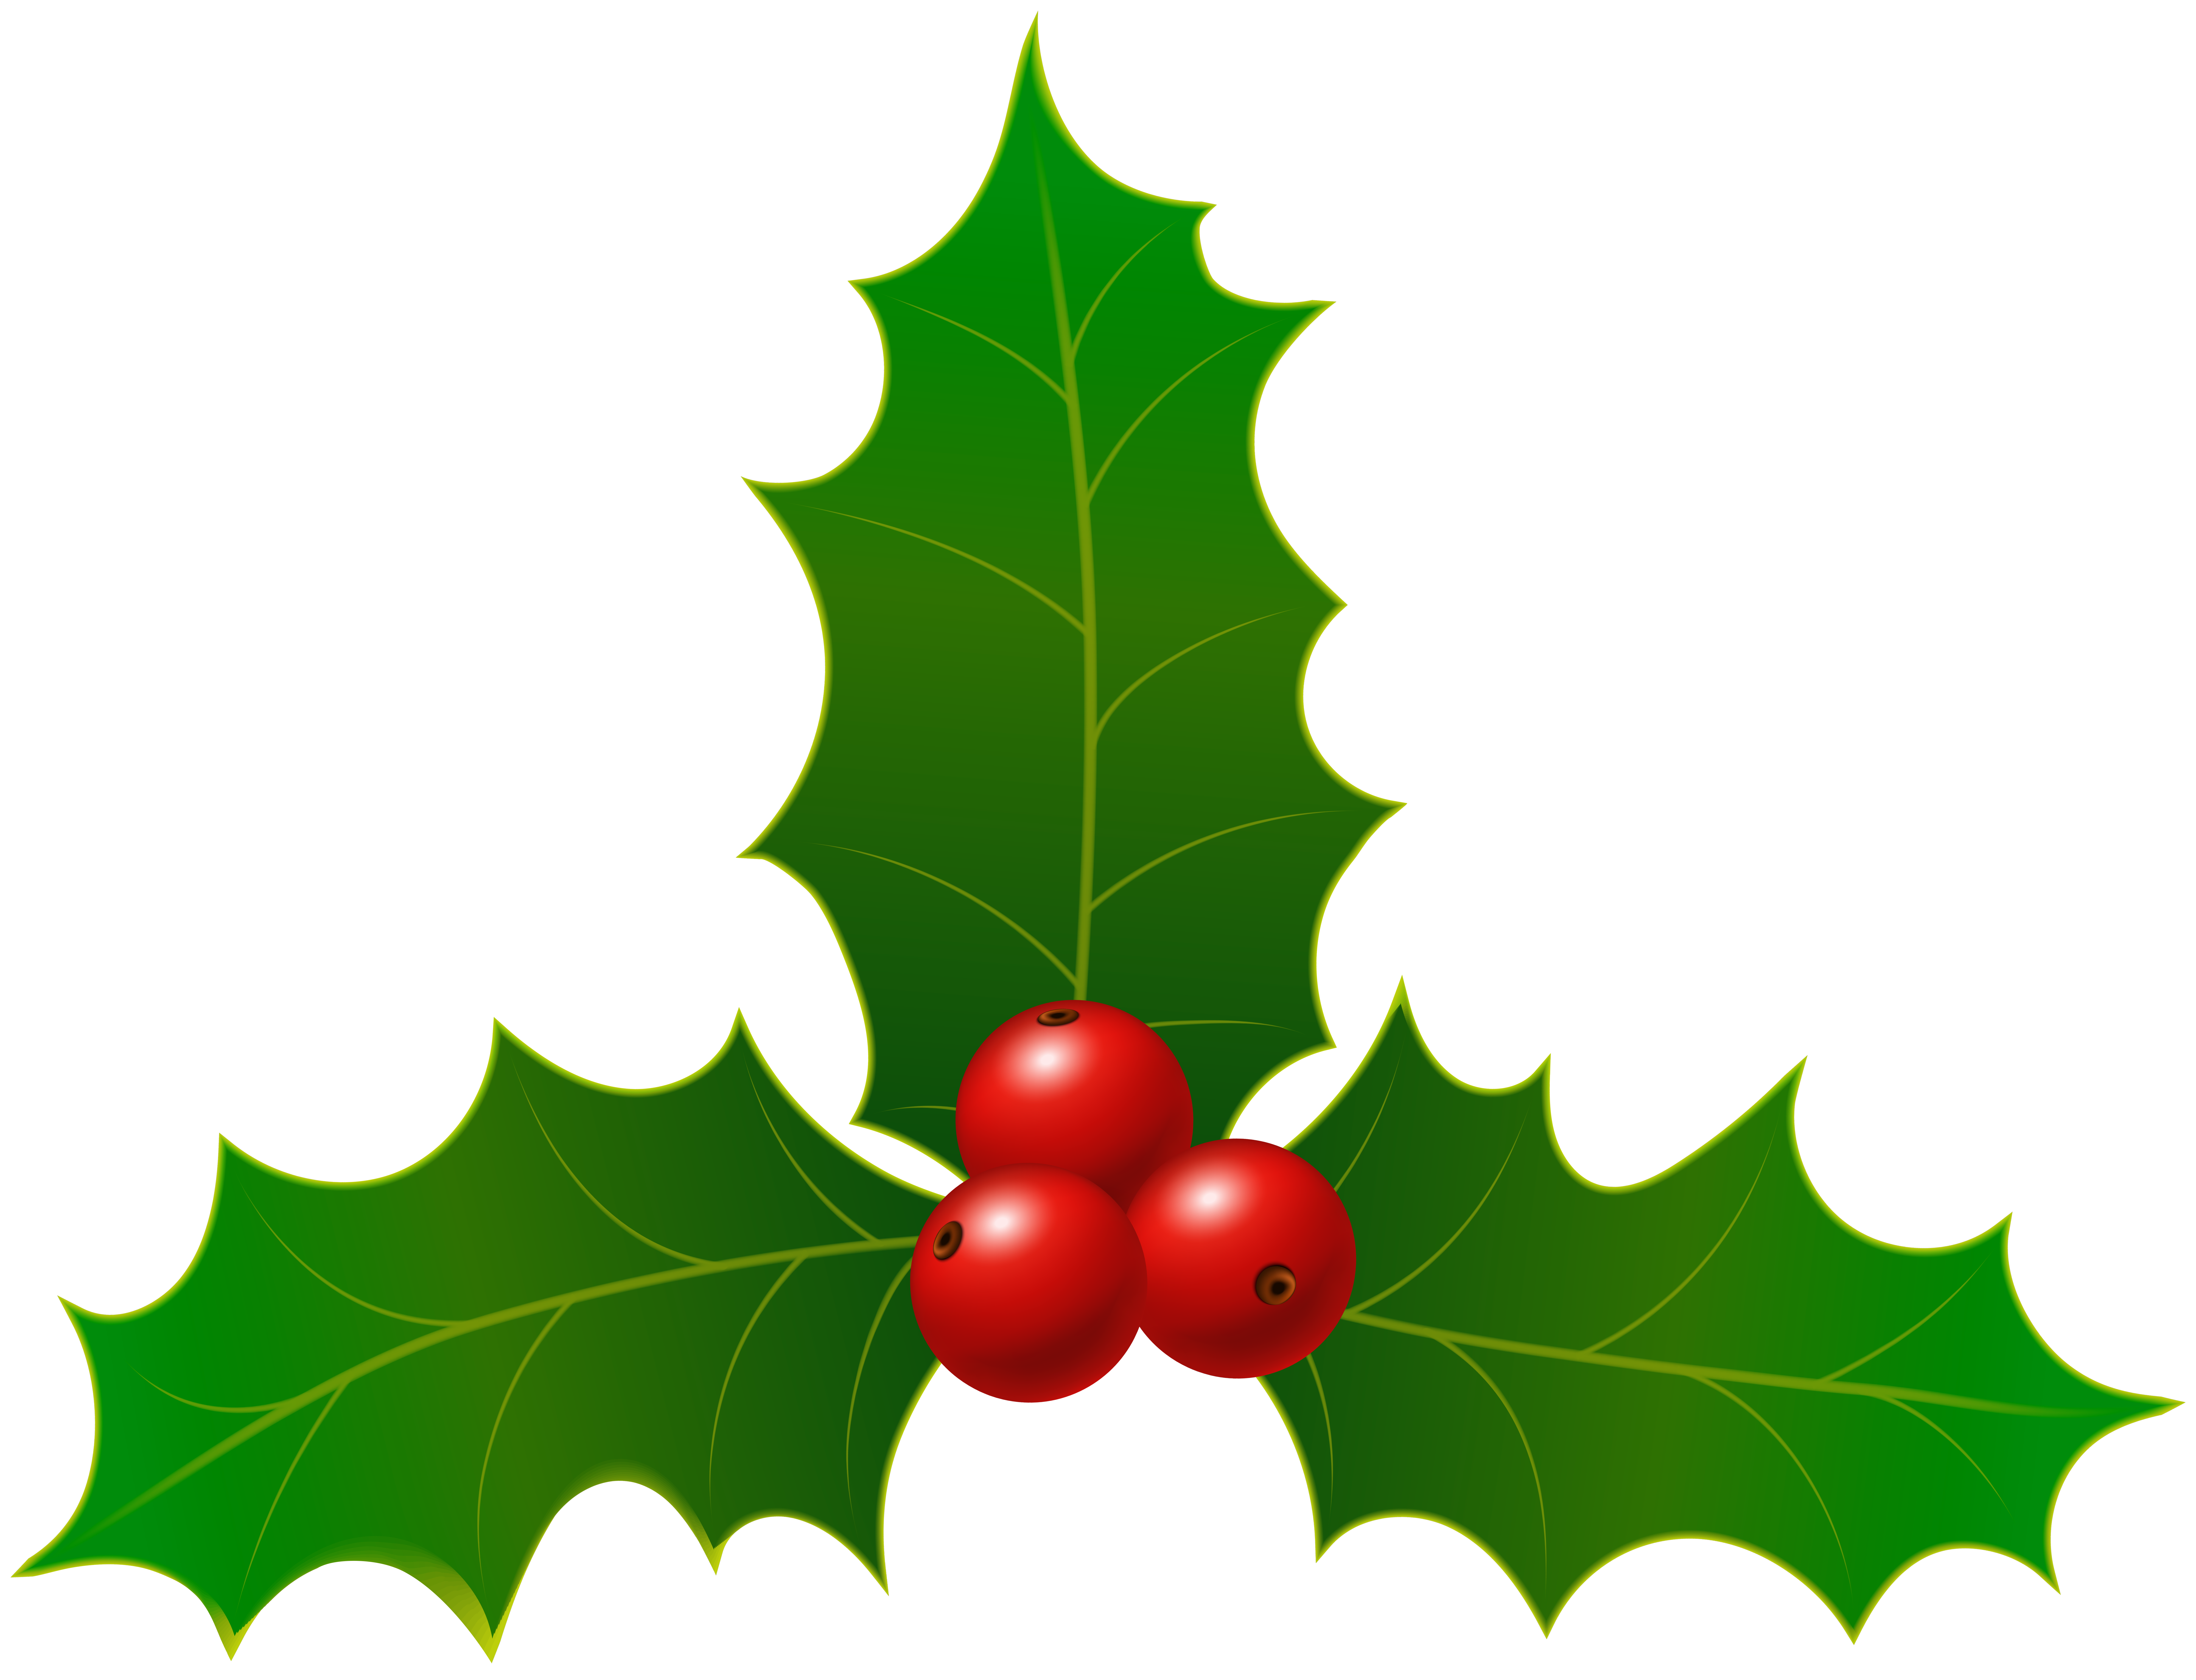 https://gallery.yopriceville.com/var/albums/Free-Clipart-Pictures/Christmas-PNG/Christmas_Holly_Clip_Art_Image.png?m=1541549308